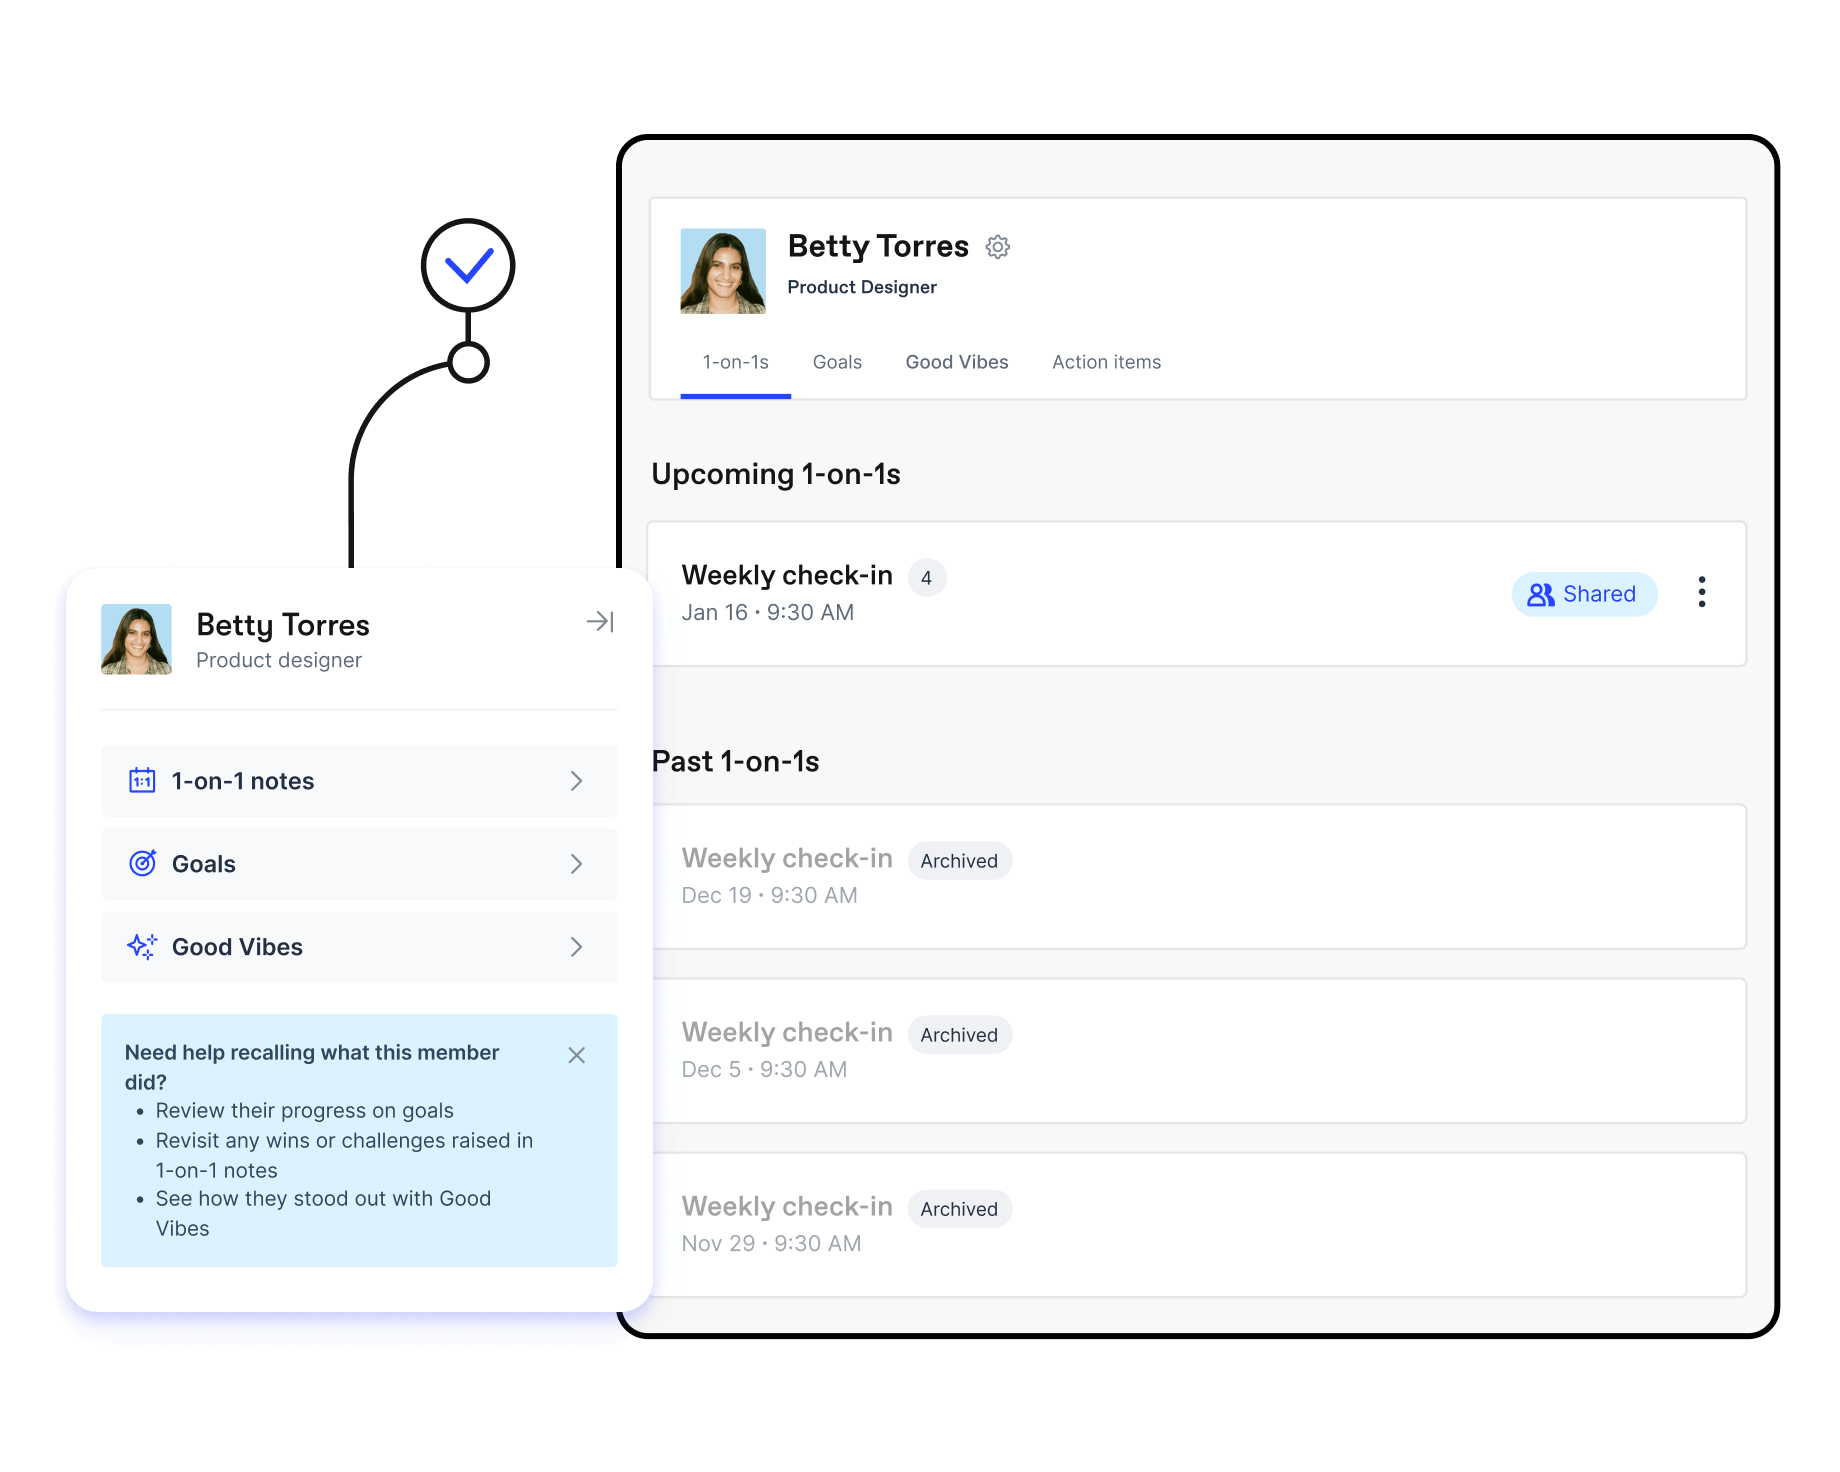 Employee profile in Officevibe showcasing the user’s team members, previous one-on-one notes, moments of recognition, and employee goals to keep one-on-one meetings productive and efficient.  